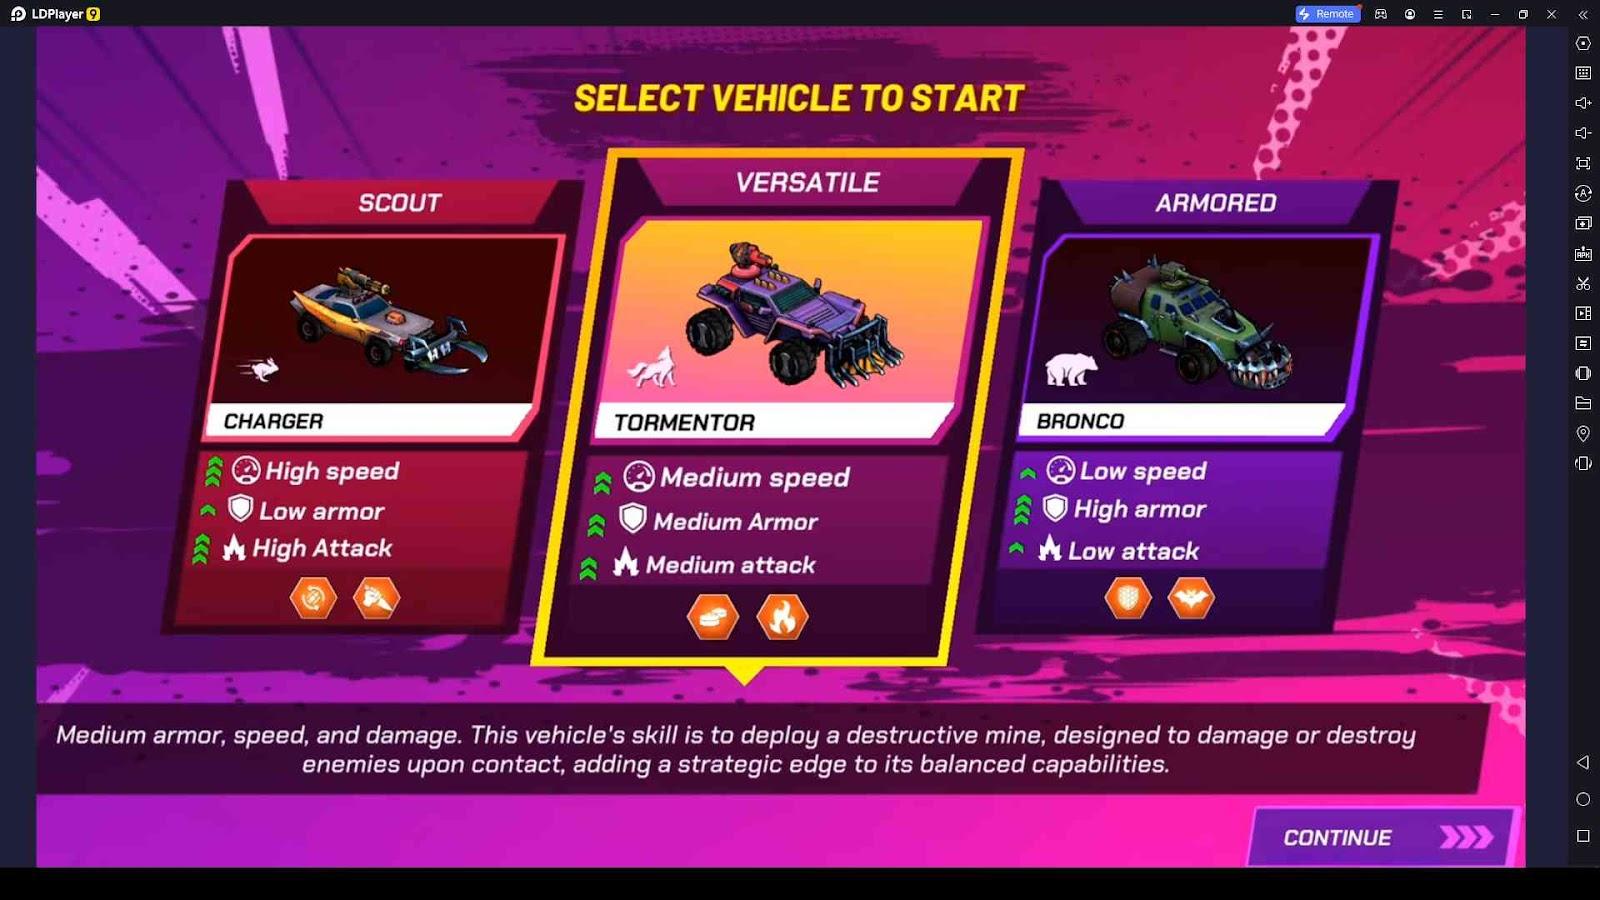 A Cool Collection of Battle Cars in Battle Cars: Fast PVP Arena